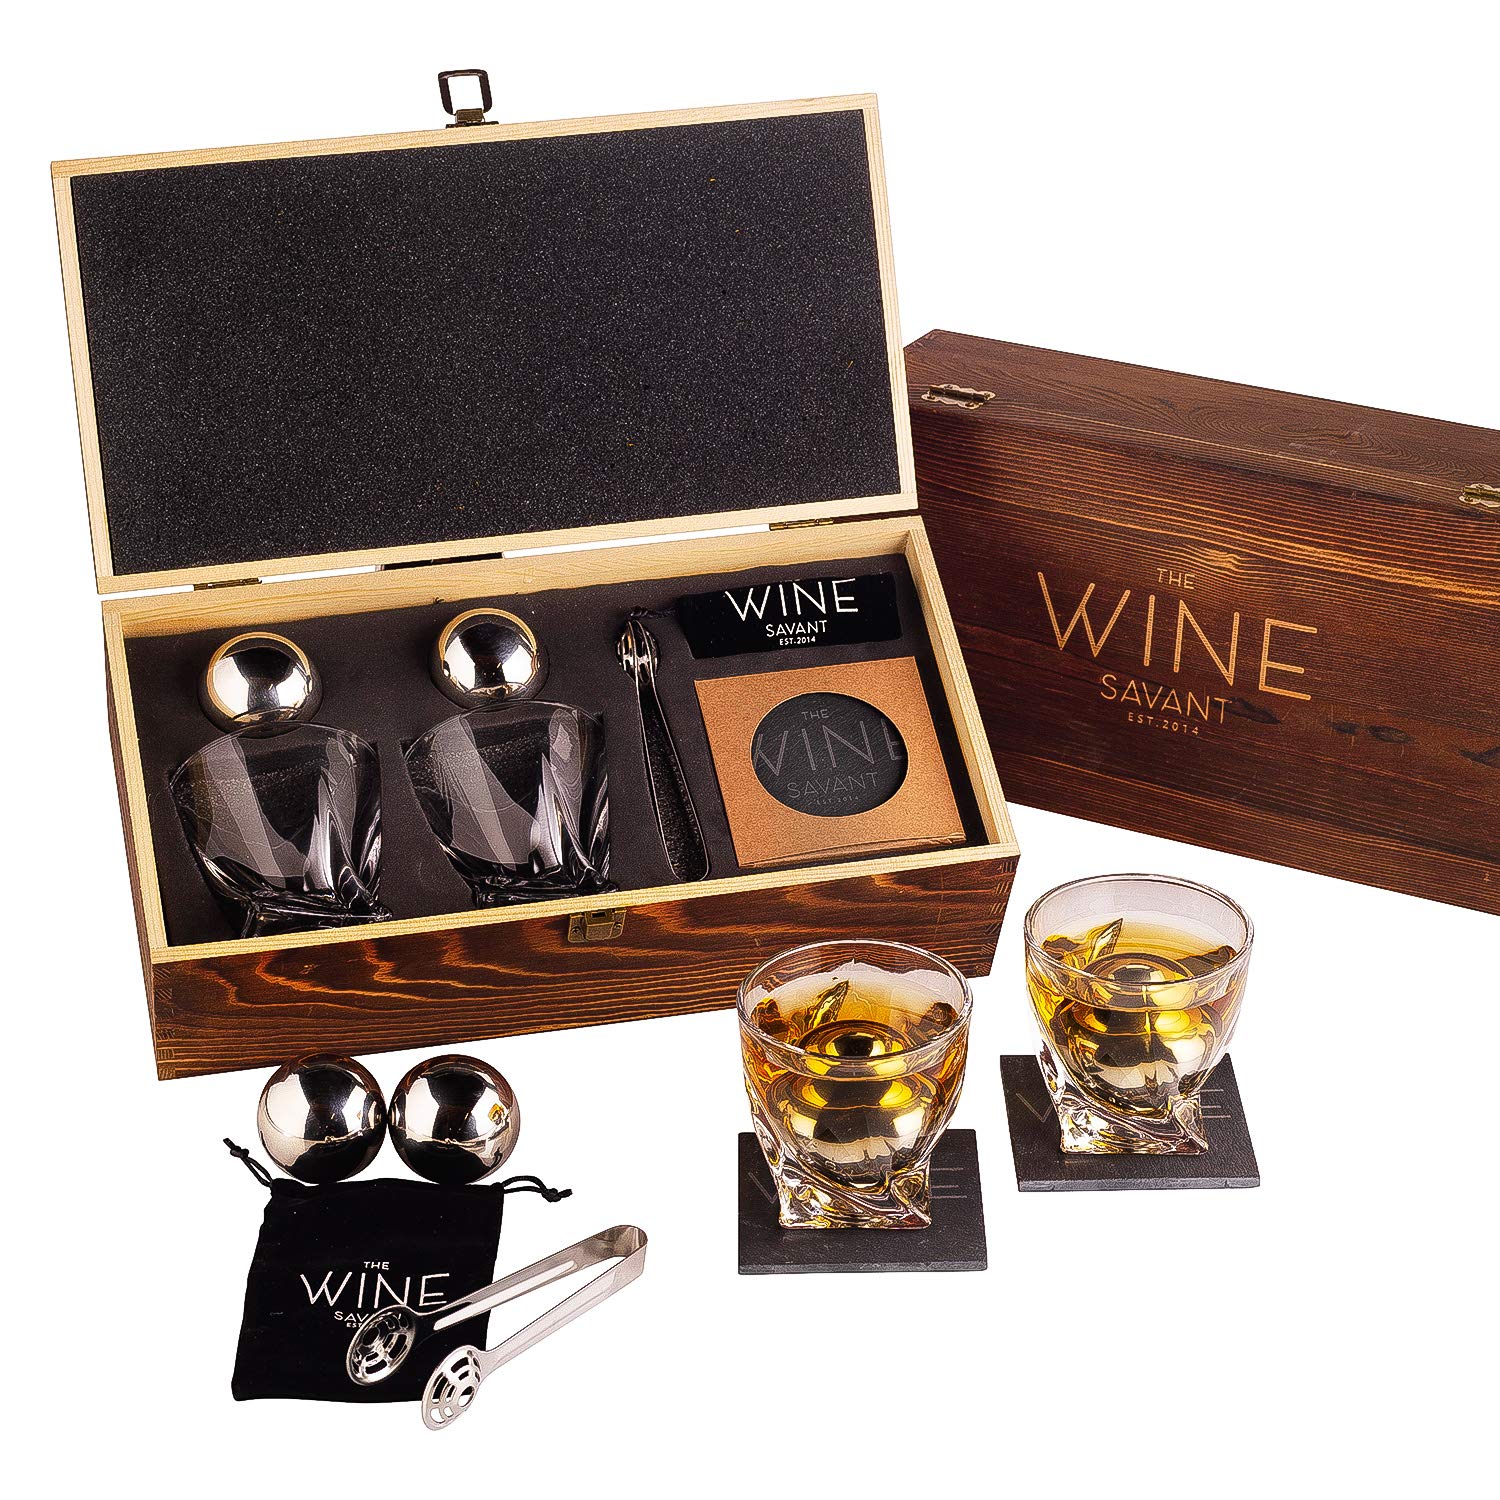 Whiskey Stones Gift Set - Whiskey Glass Set of - 2 King-Sized Chilling Stainless-Steel Whiskey Balls - Scotch Bourbon Box Set - Best Drinking Gifts - Men Dad Husband Birthday Party Present